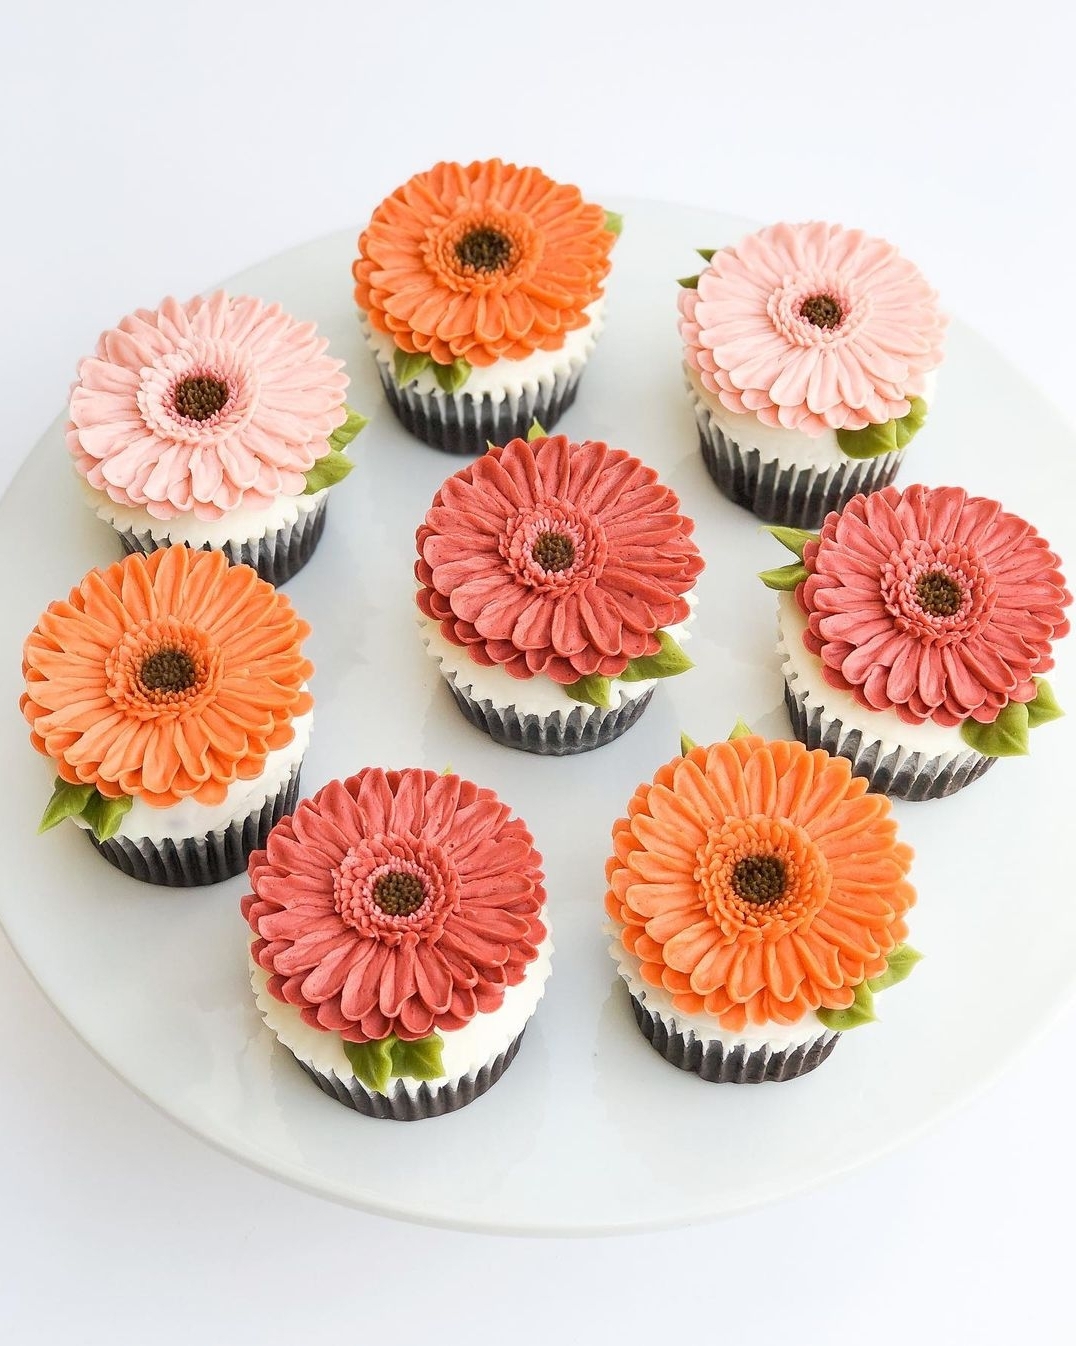 63 exquisitely designed cupcakes by Lila cake shop.